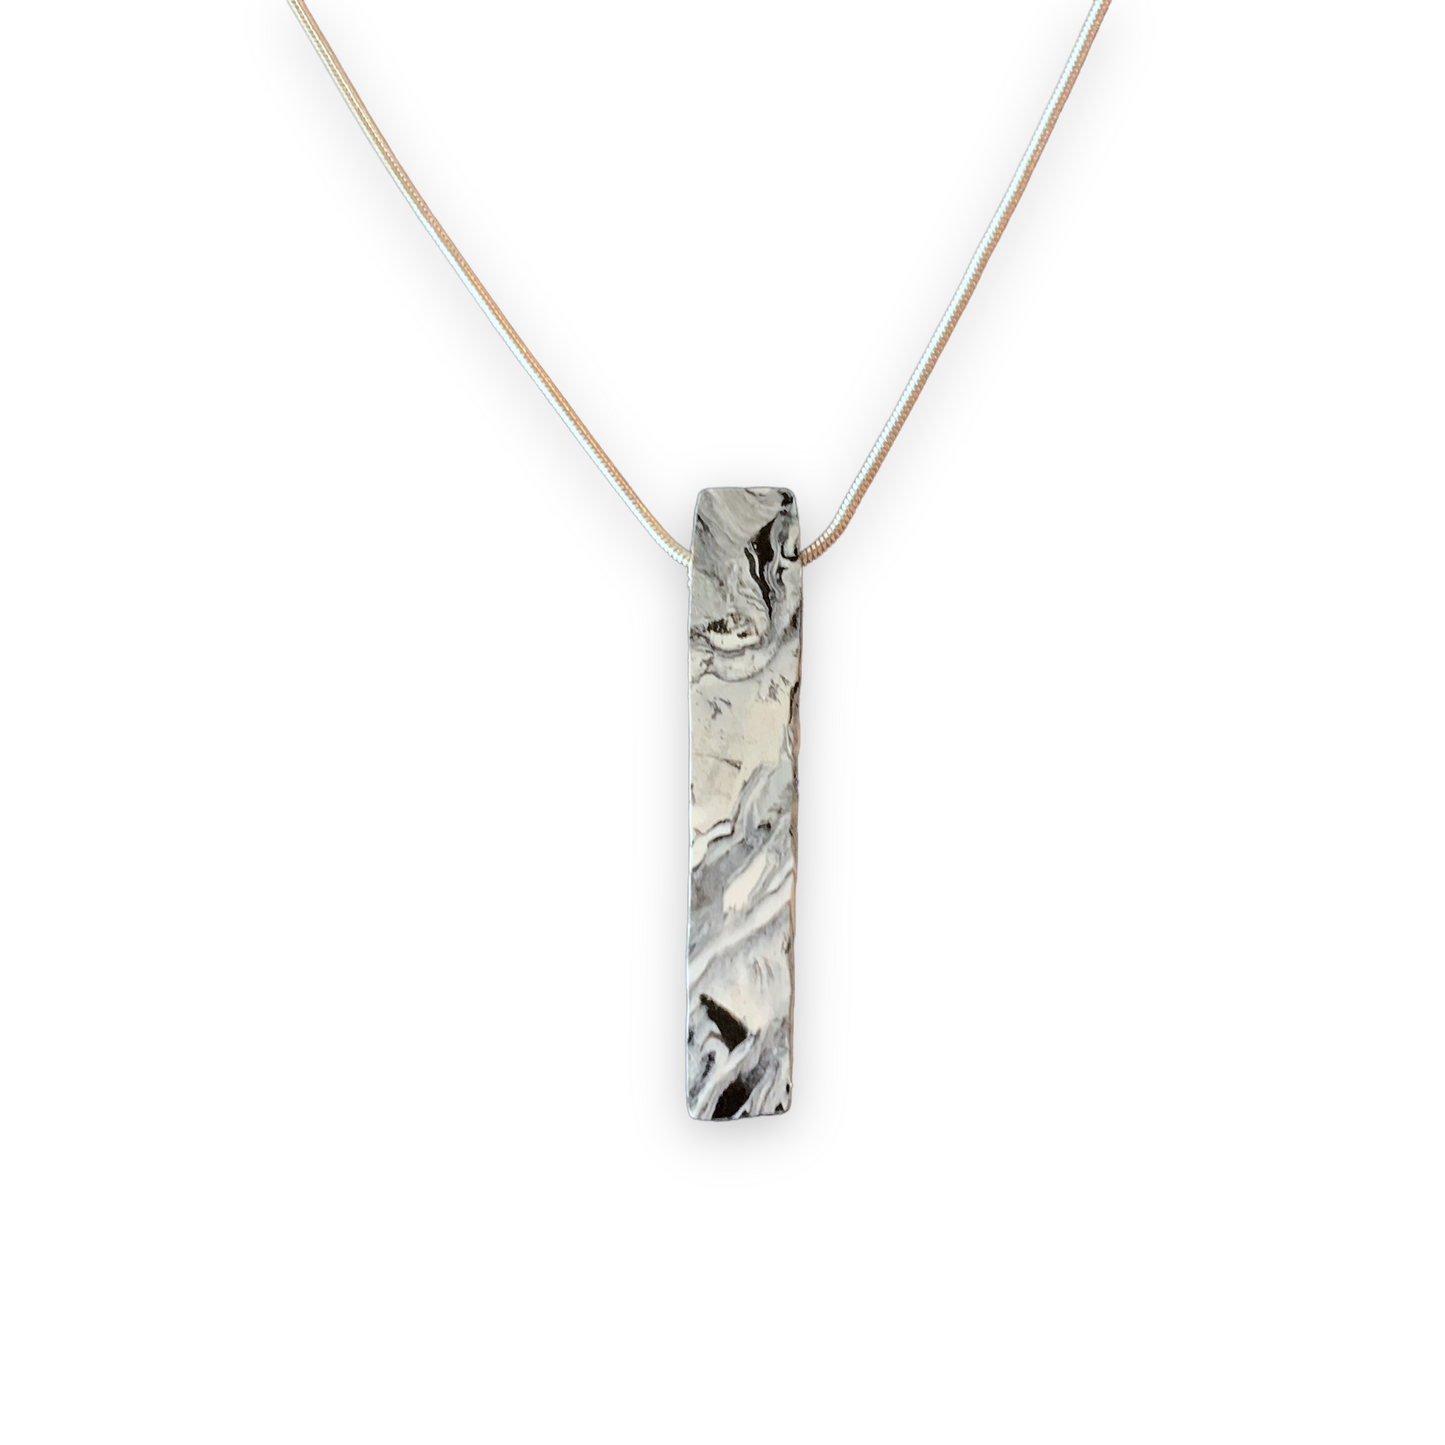 One Bar Necklace with 925 Sterling Silver Snake Chain Stone sustainable eco friendly recycled plastic